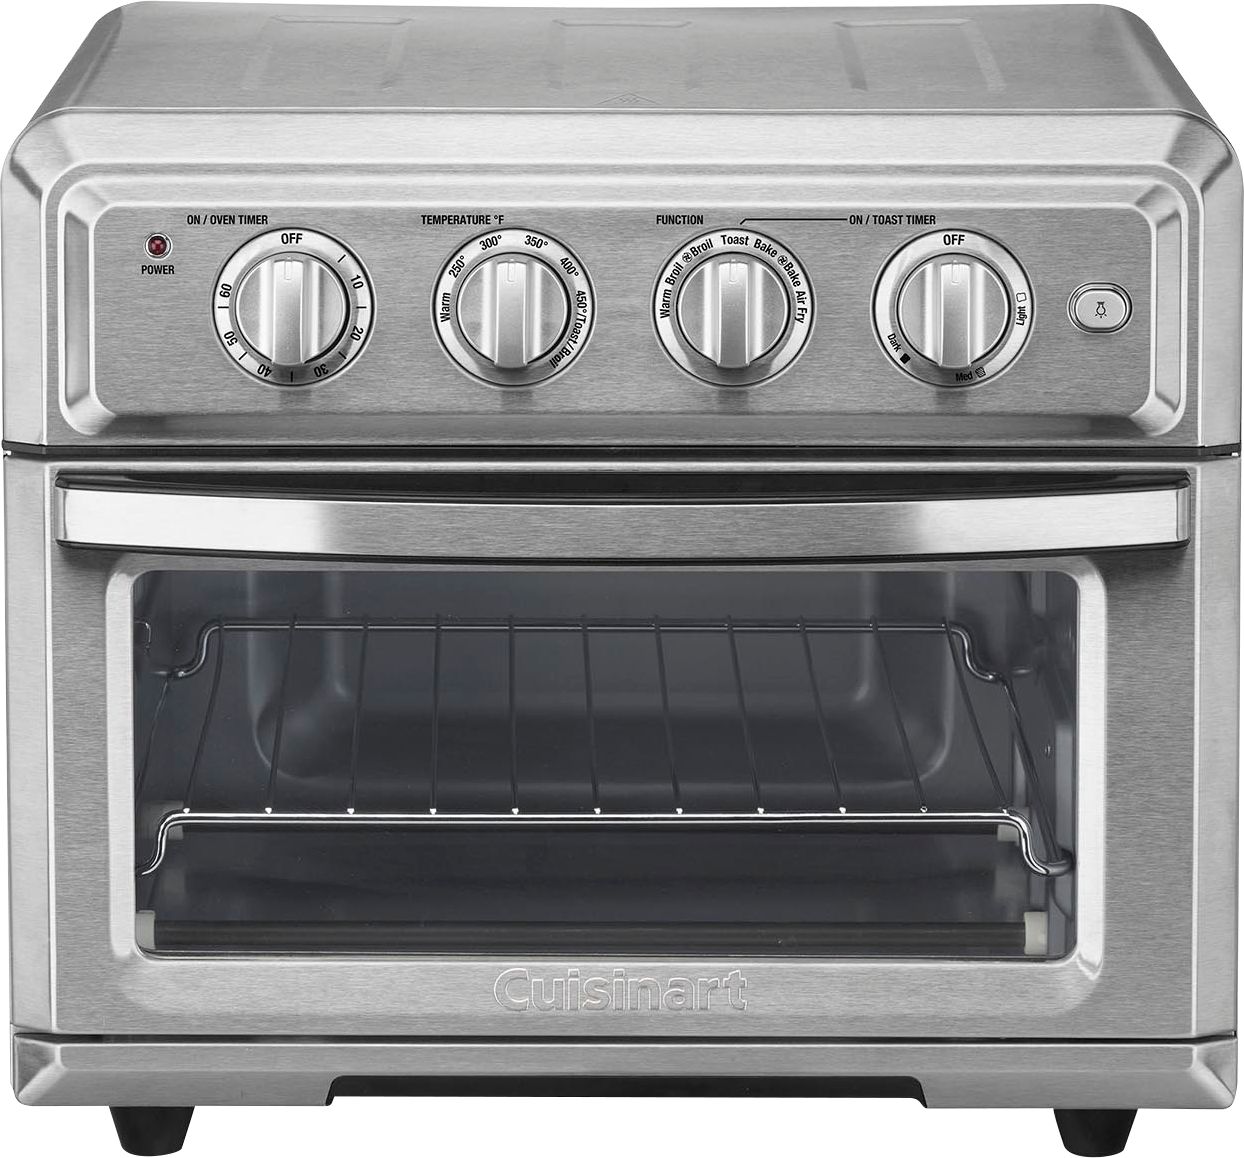 Cuisinart – Air Fryer Toaster Oven – Stainless Steel – Just $129.99 at Best Buy